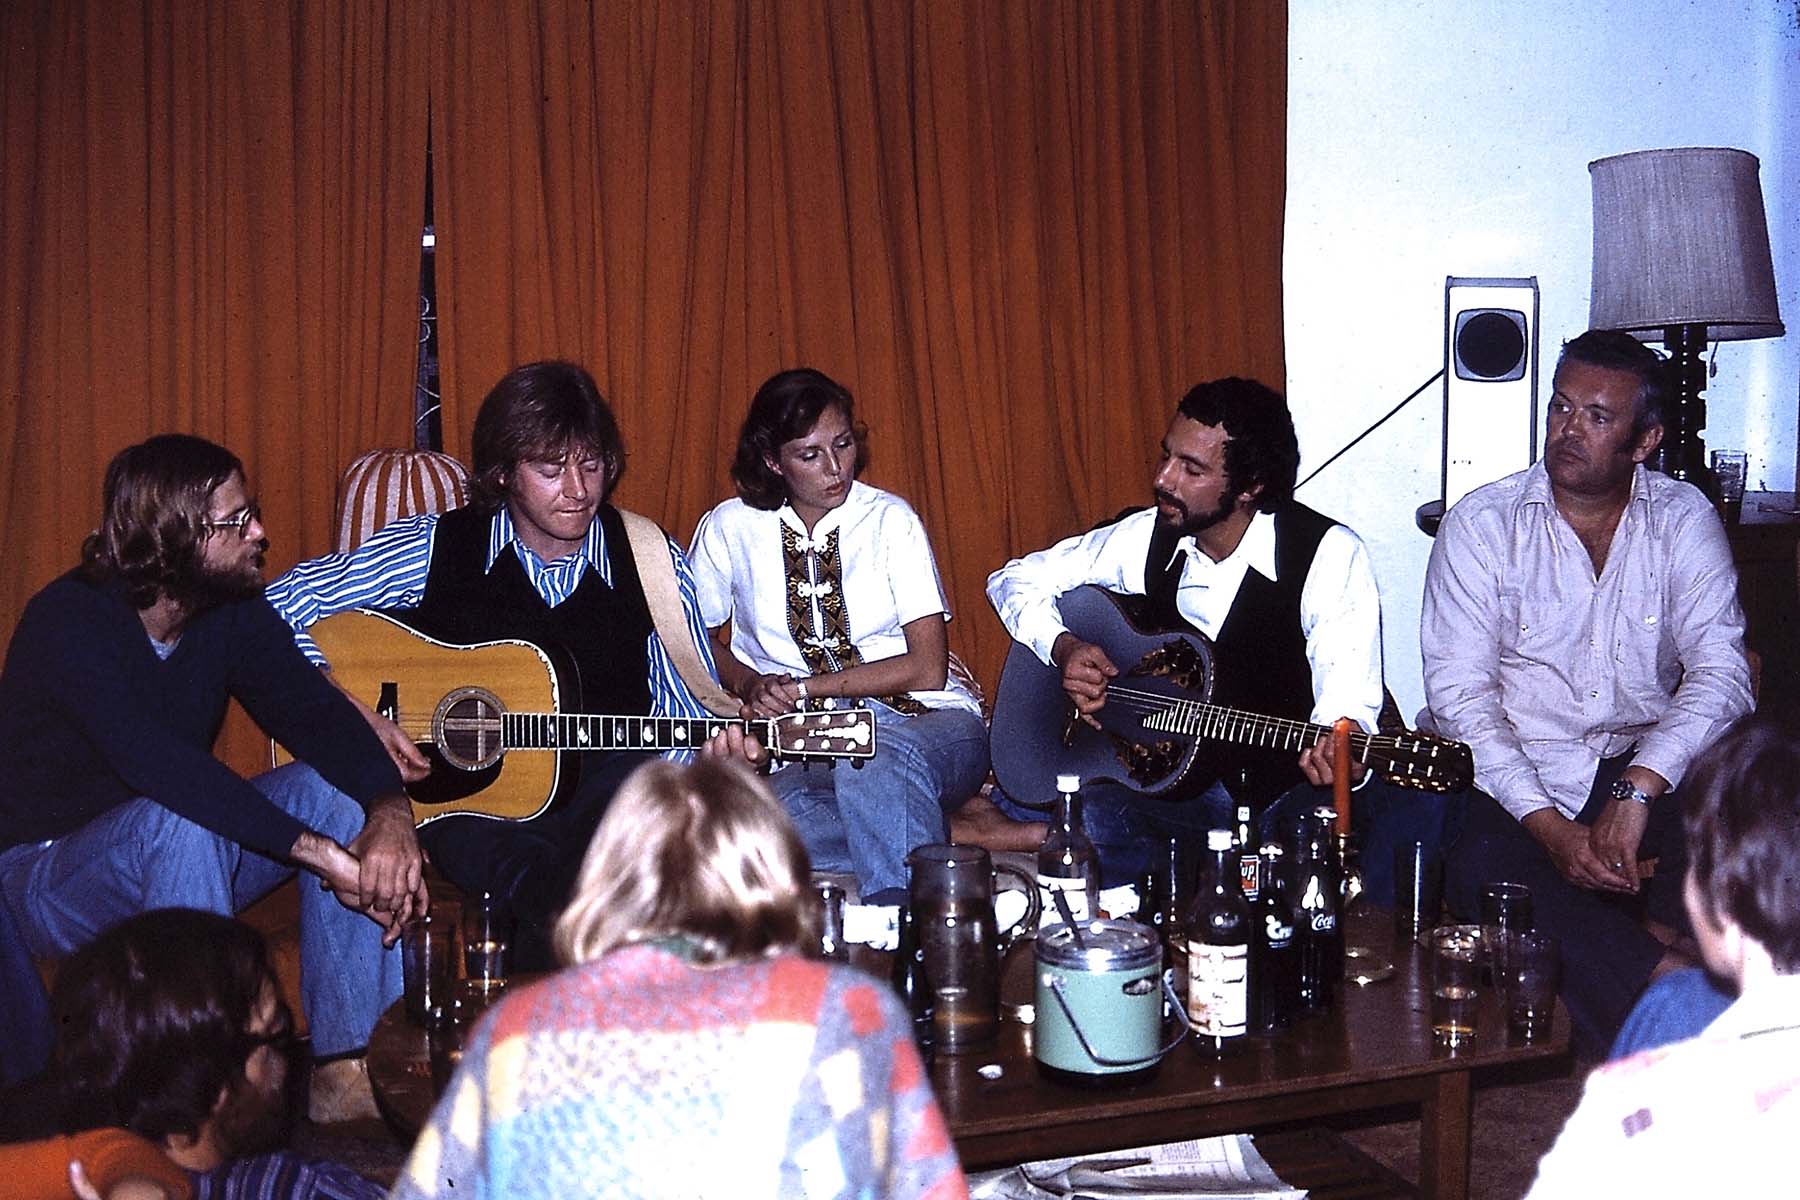 A music session in Bangladesh featuring Cat Stevens